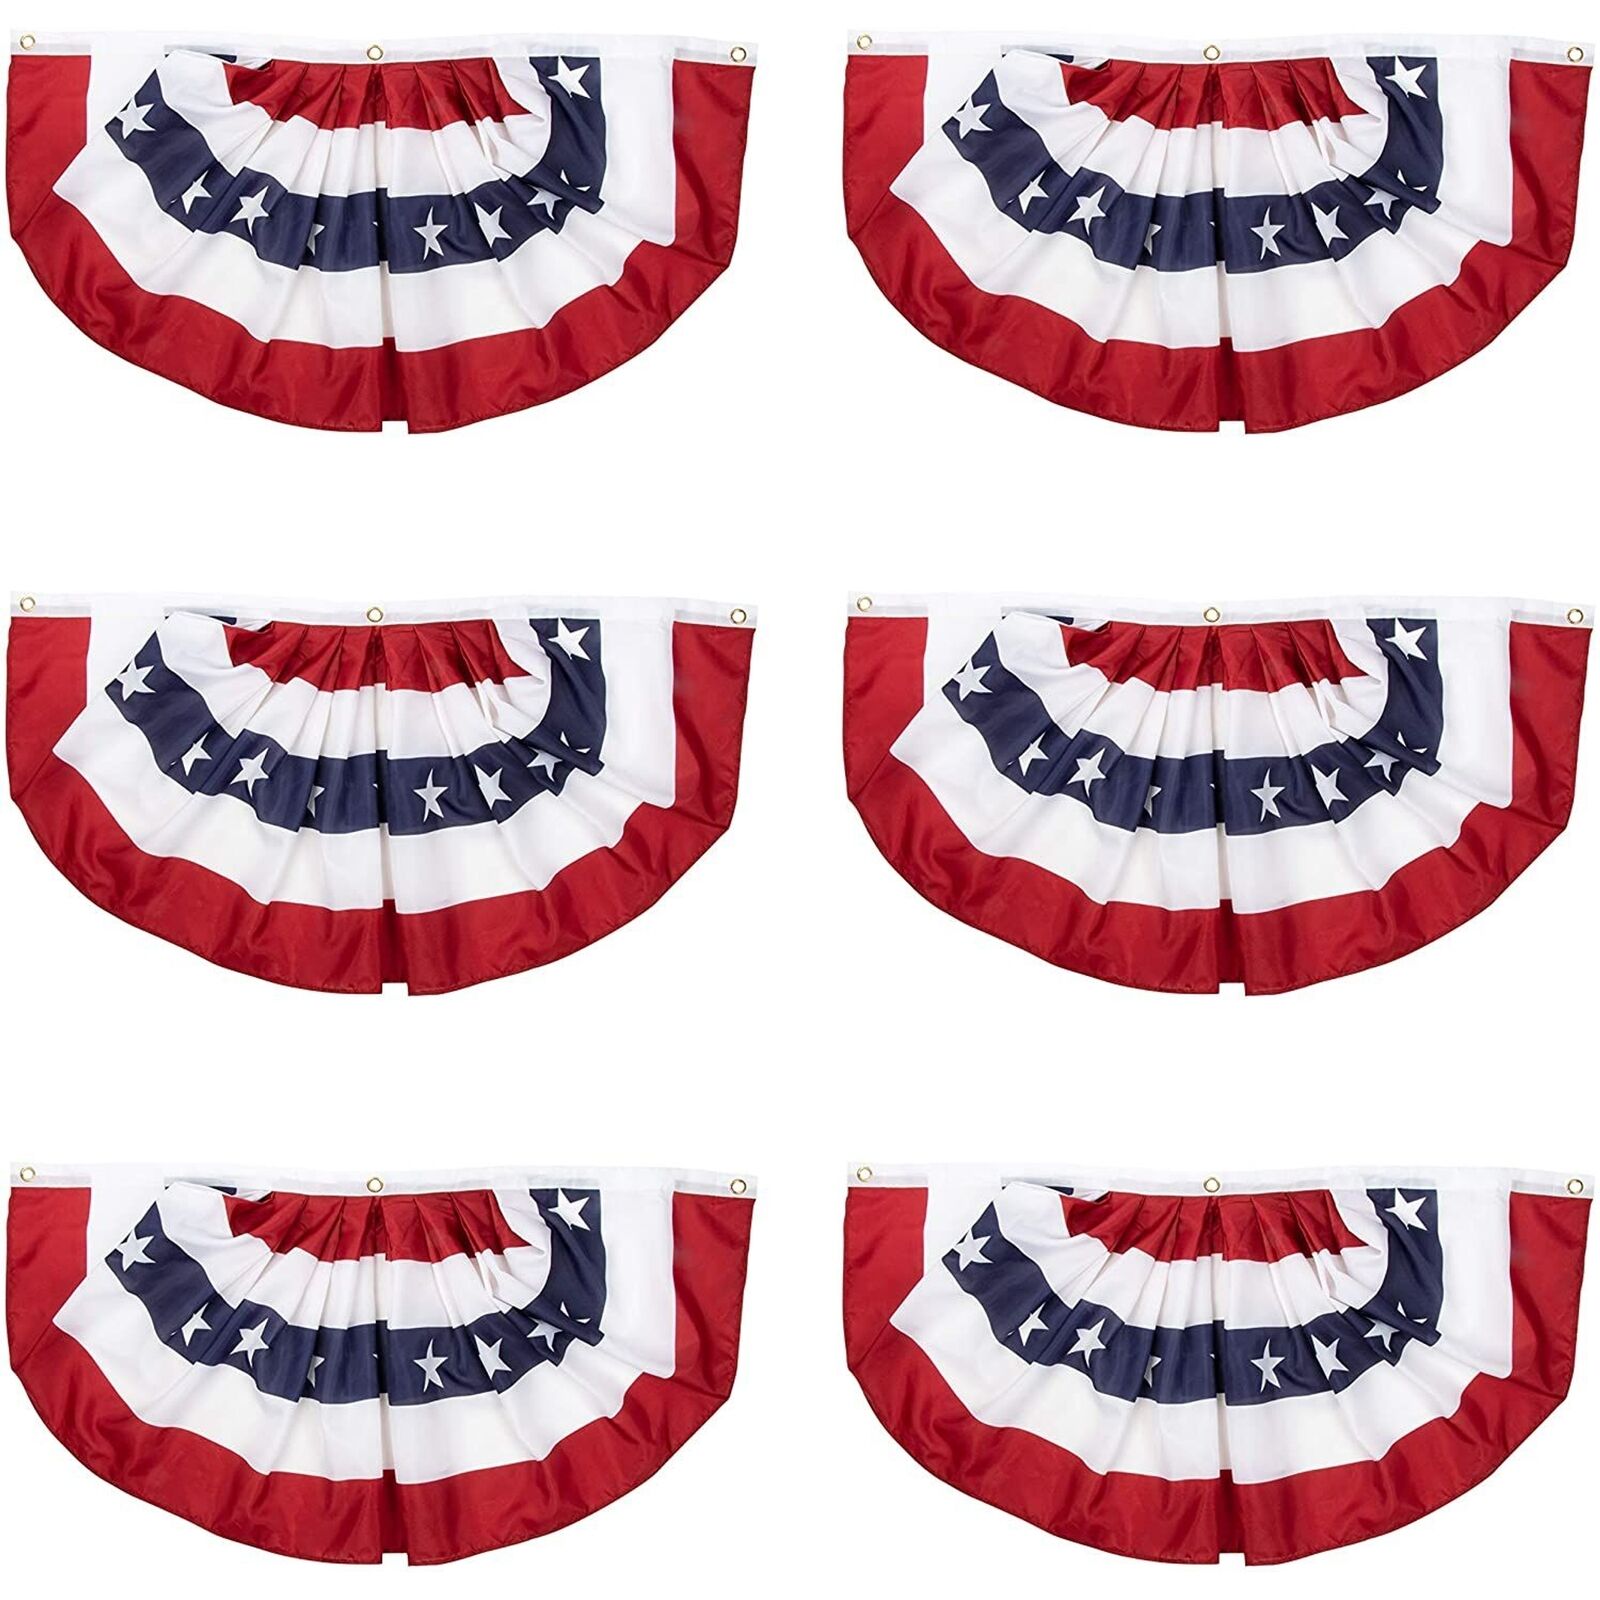 6 PCS 4th of July American Flag Patriotic Banner for Outdoor Decor 36.5x18.5